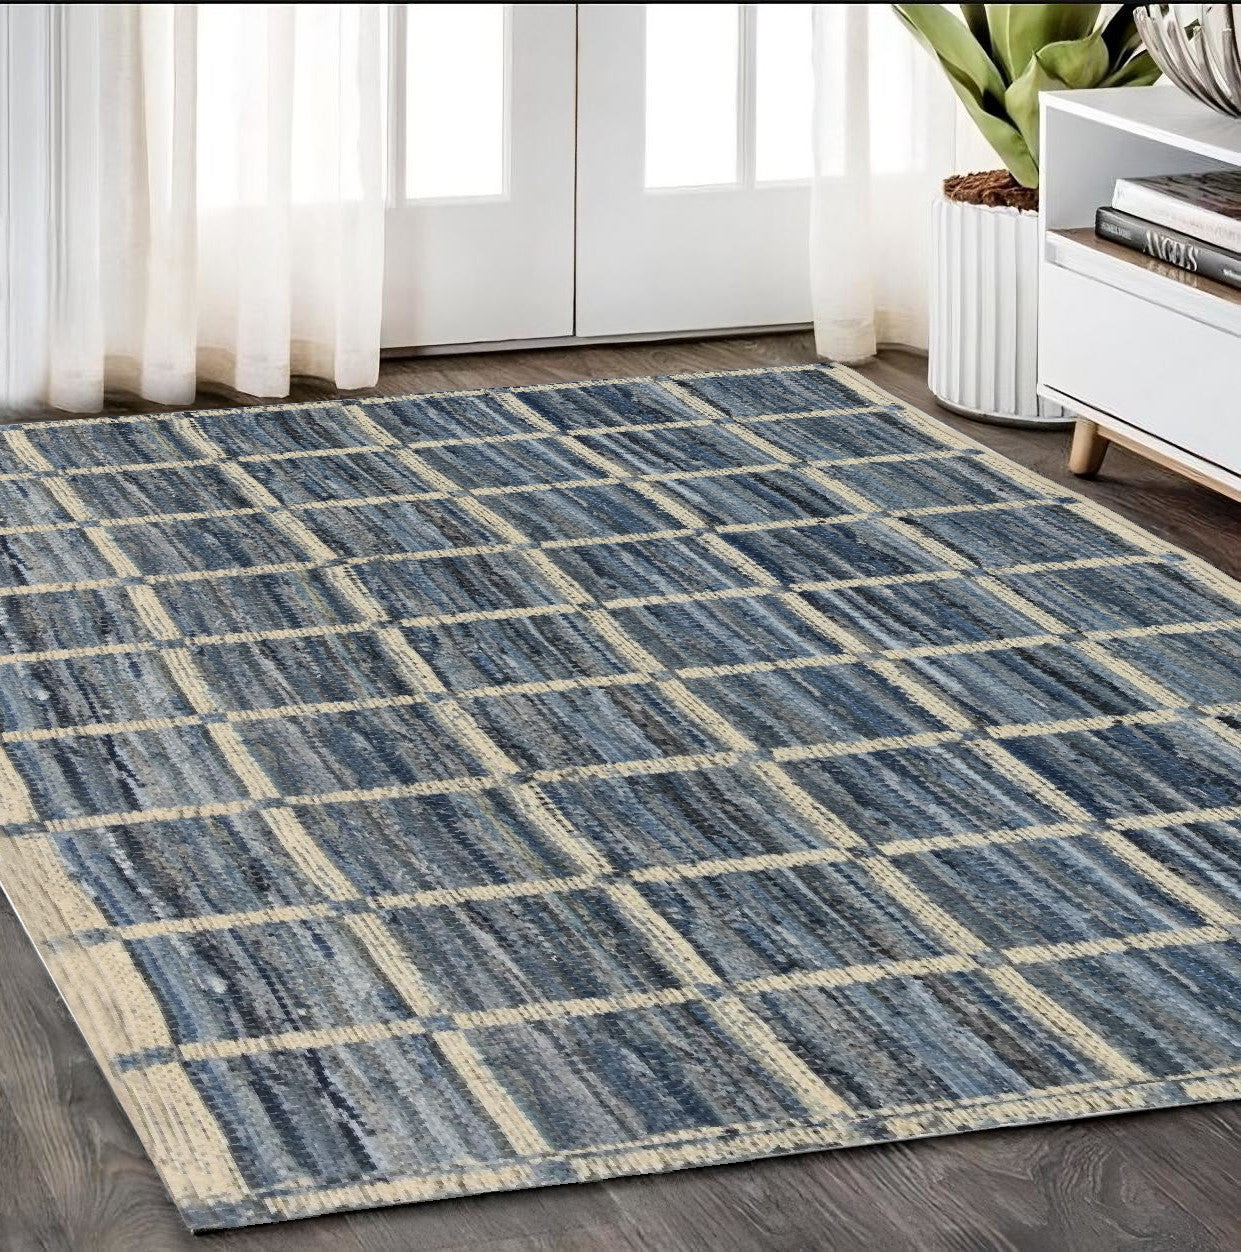 5' x 8' Blue and Gray Area Rug